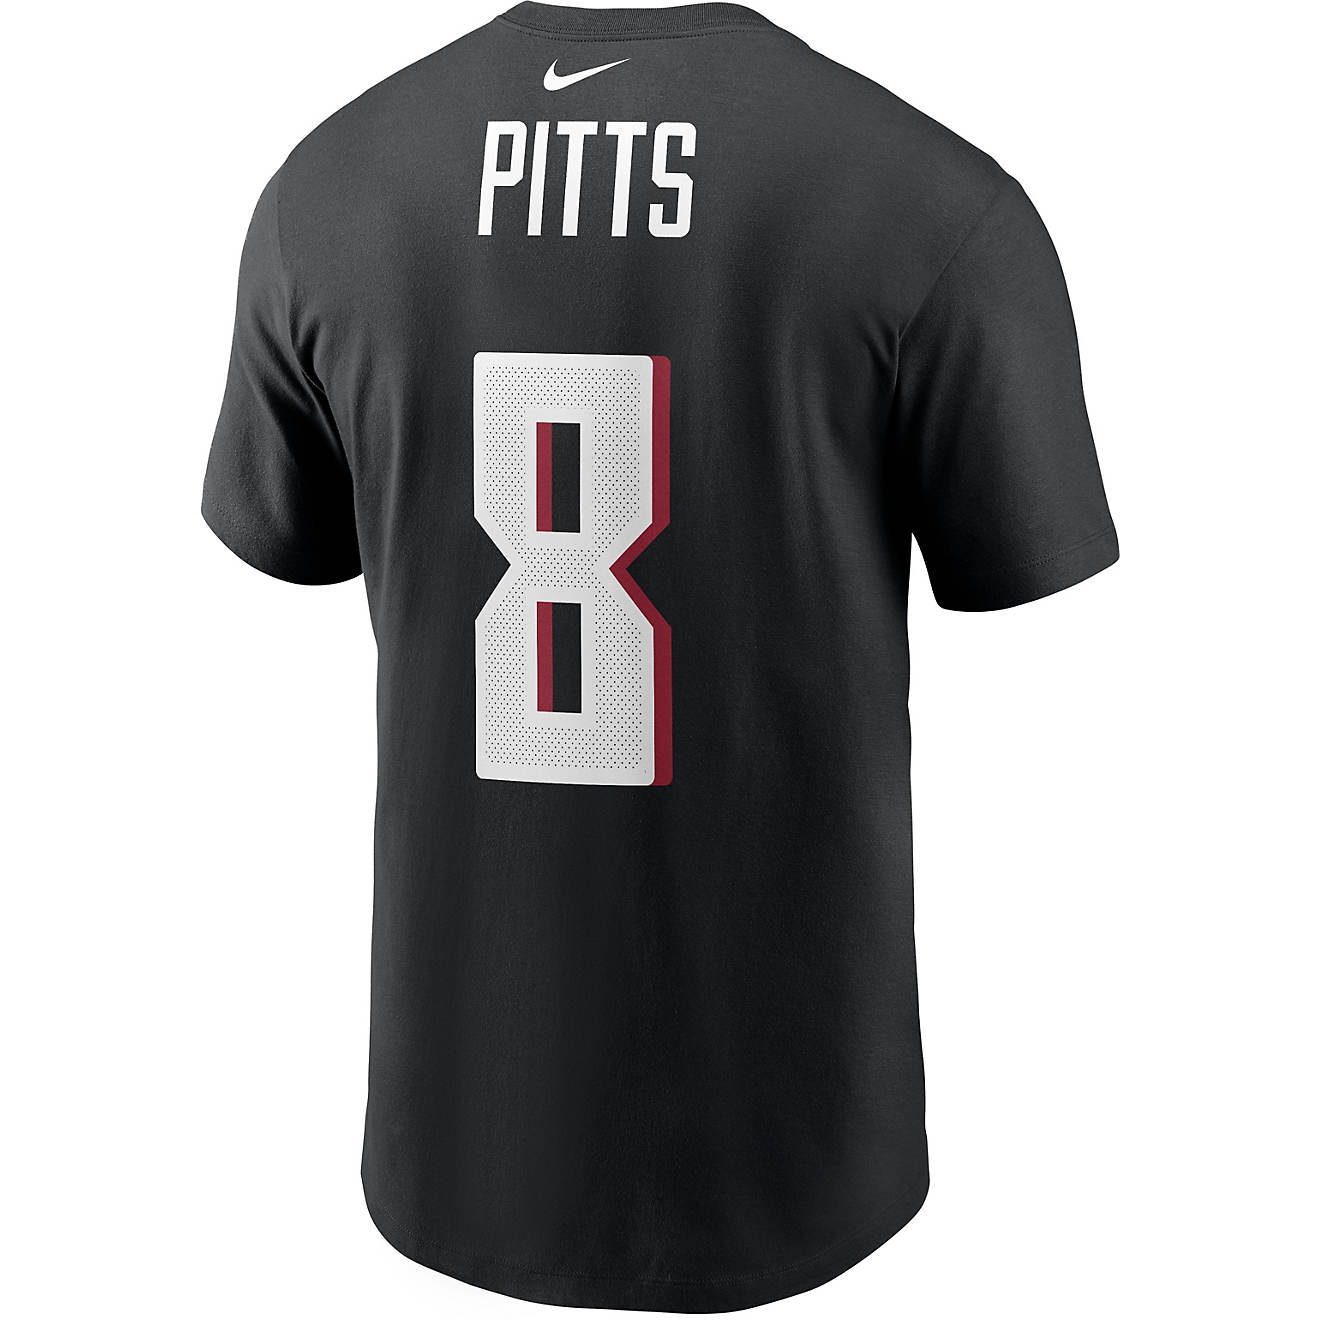 Men's Atlanta Falcons Pitts Name and Number Graphic T-shirt                                                                      - view number 1